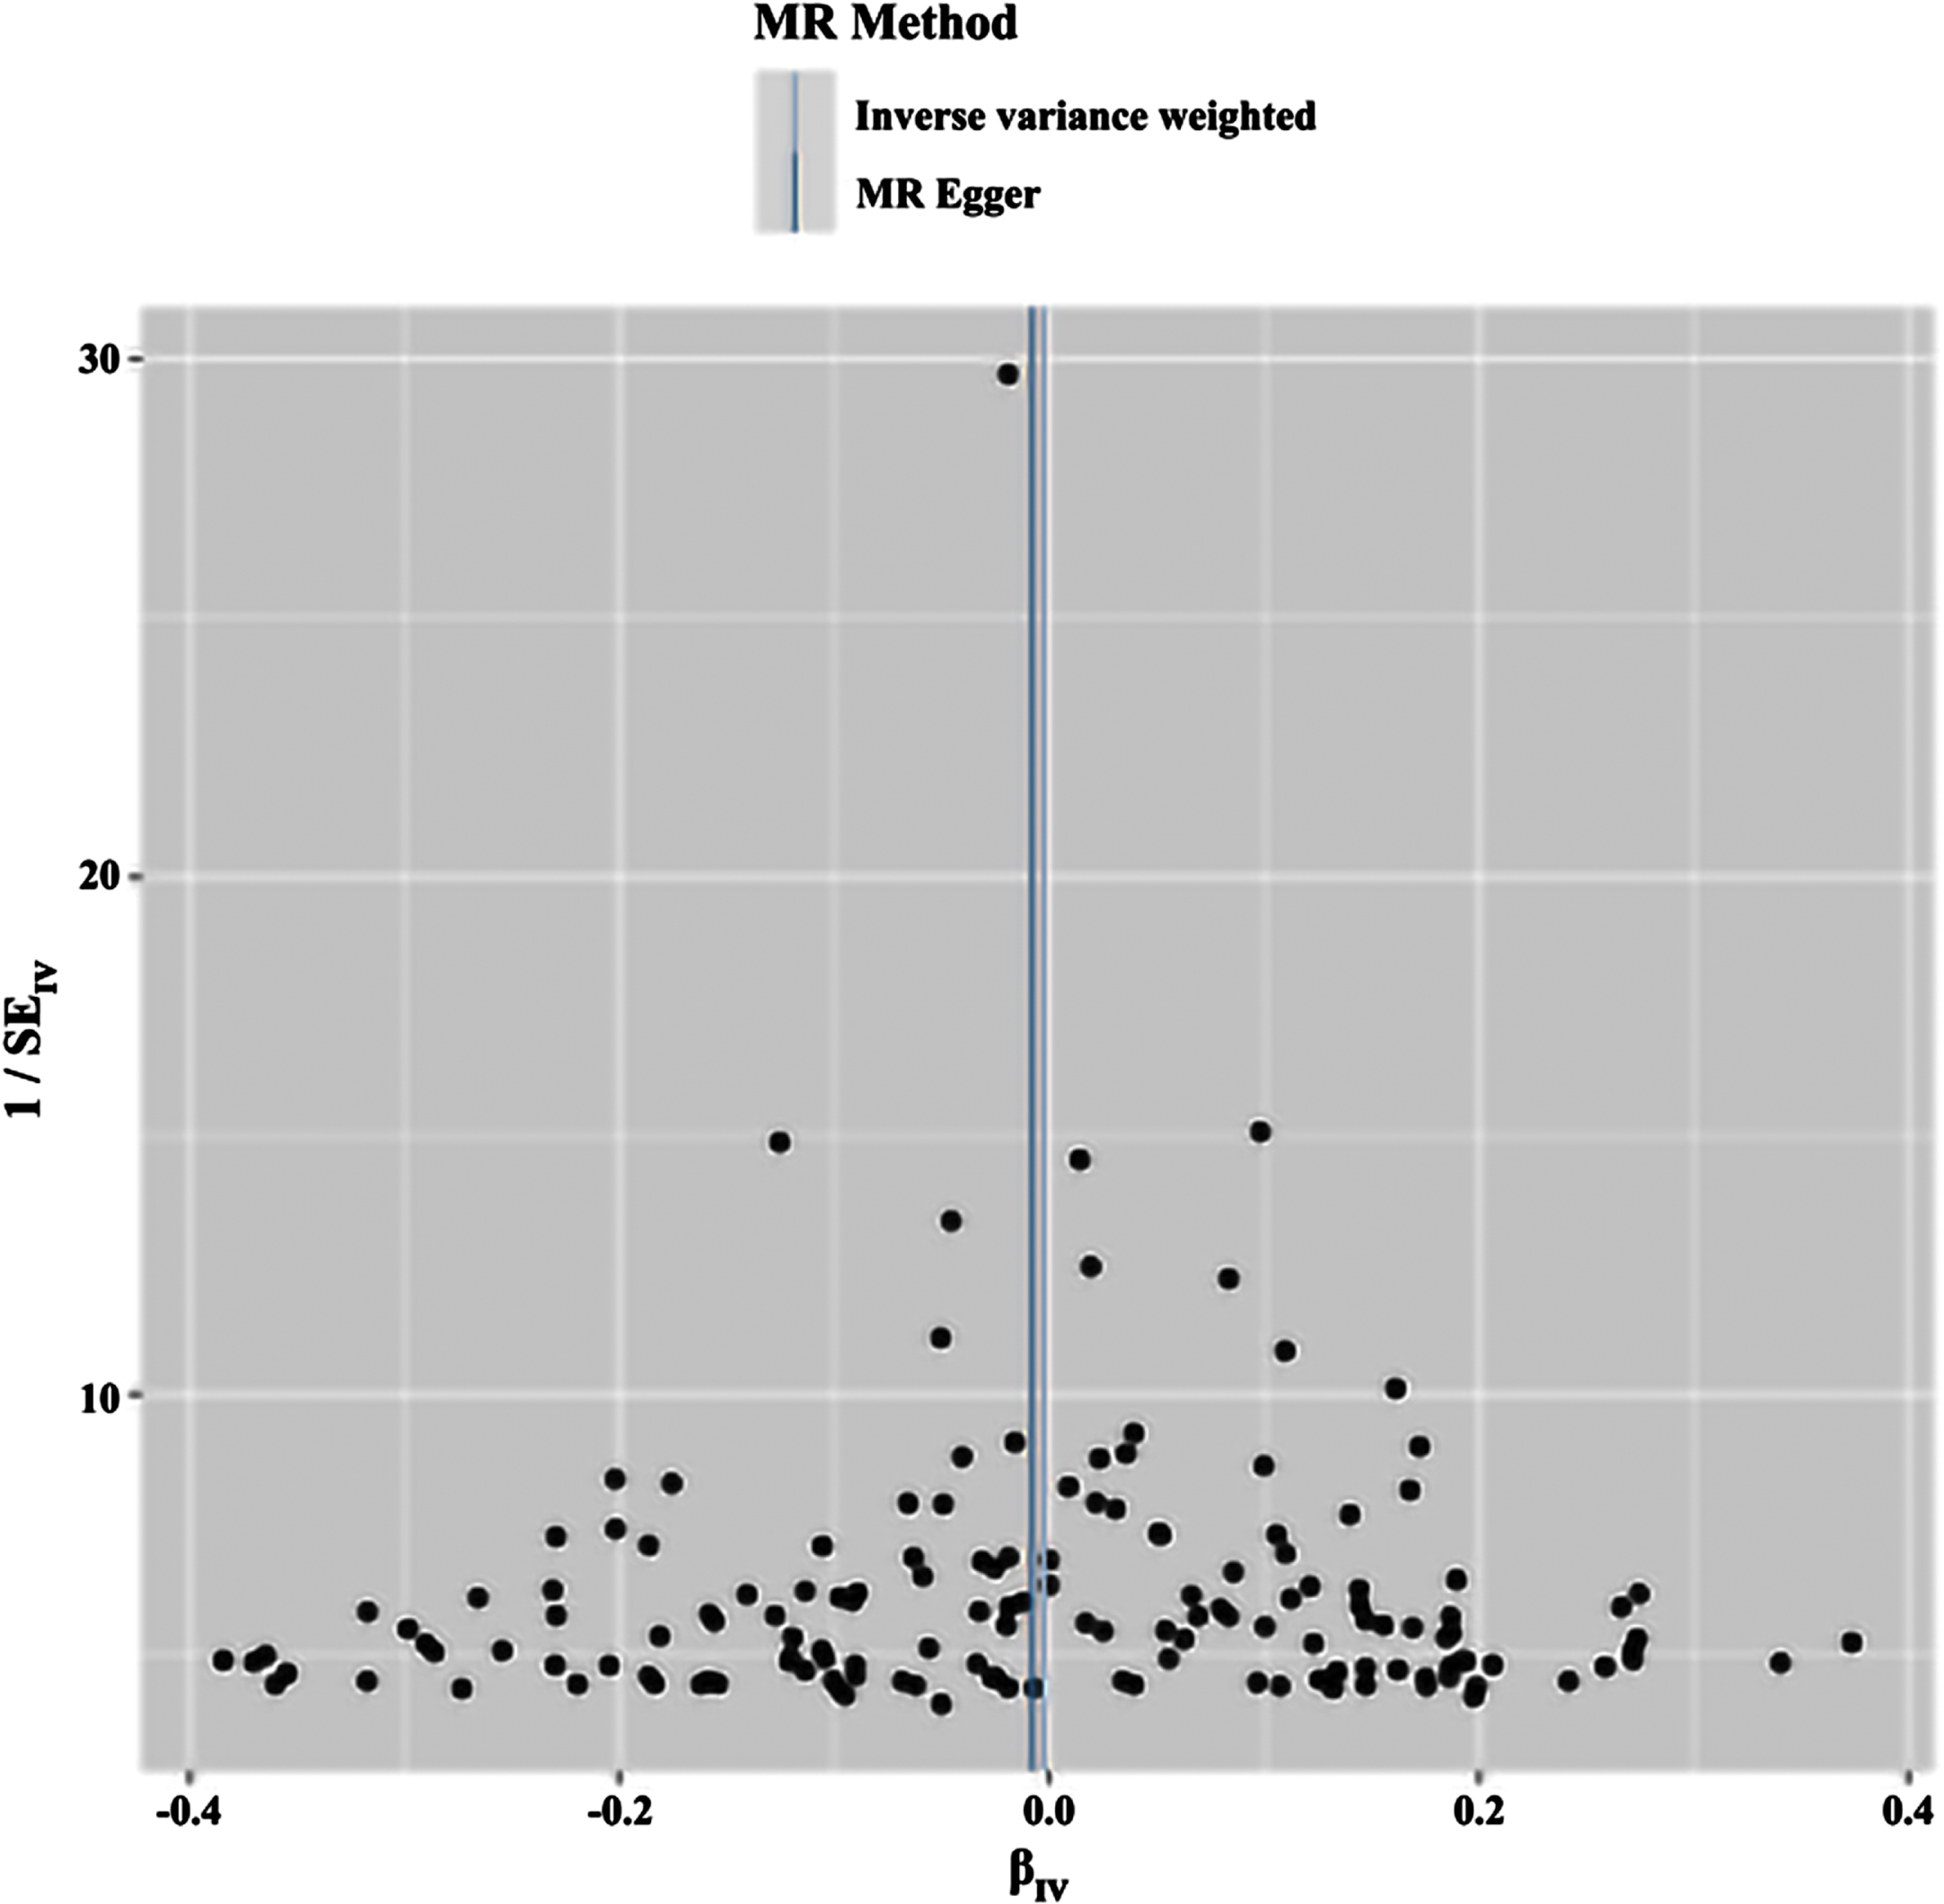 Funnel plot of the results of the heterogeneity test for reverse MR method analysis. The funnel plot demonstrates that a single SNP is a causally relevant point for IV generation and exhibits a symmetrical distribution, suggesting minimal variation between IVs. MR Method, Mendelian Randomization Method; MR Egger, Mendelian Randomization Egger. IV, instrumental variables.